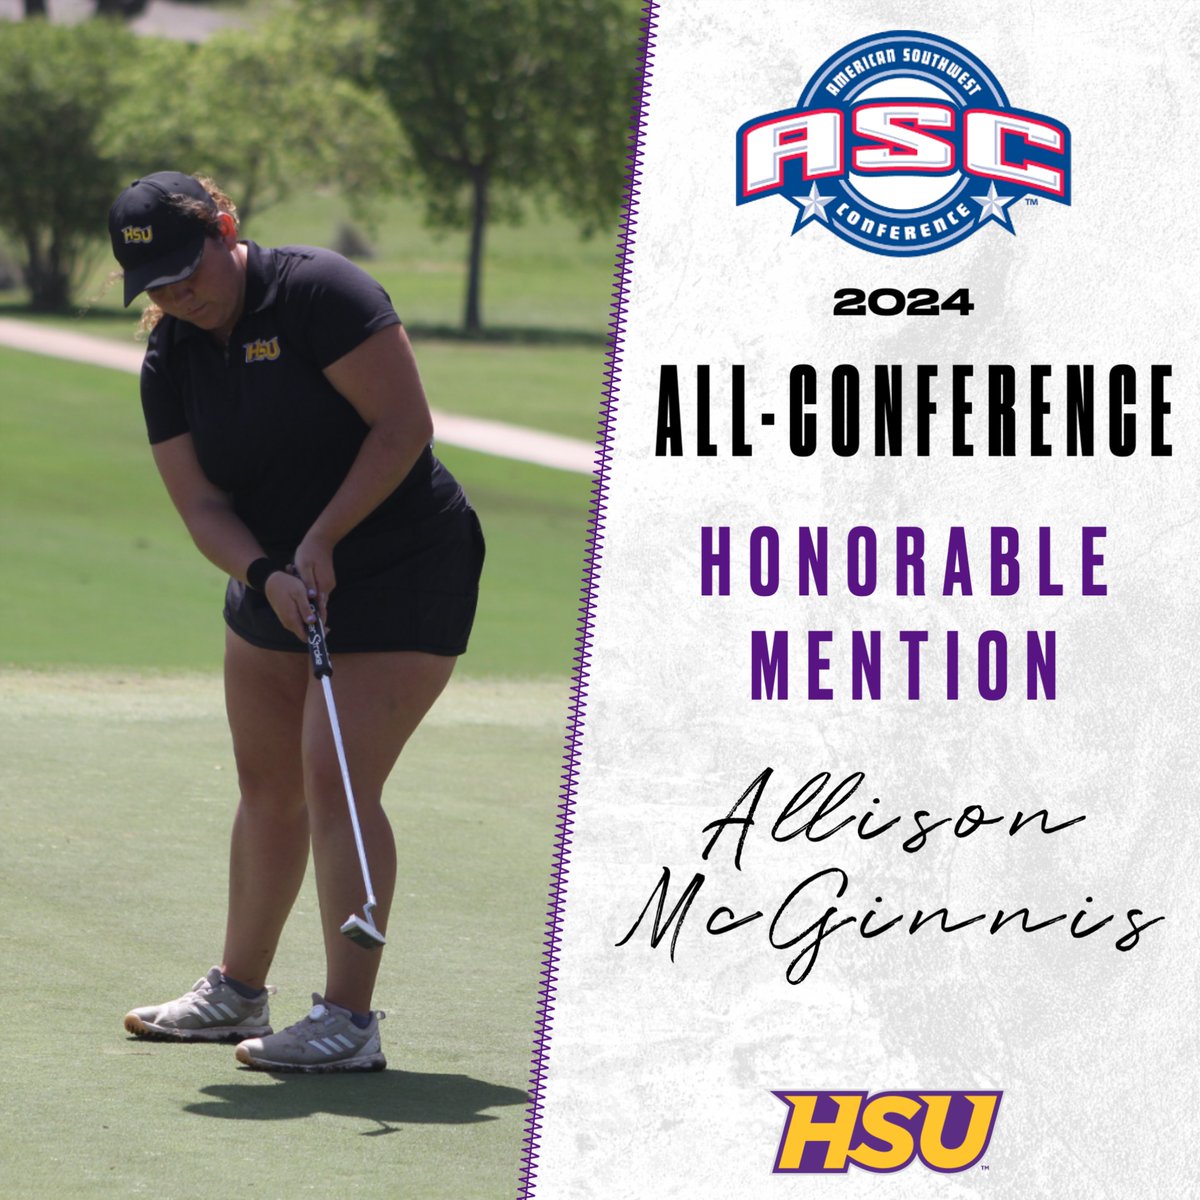 Congrats to Allison McGinnis on being named ASC Honorable Mention 🤠